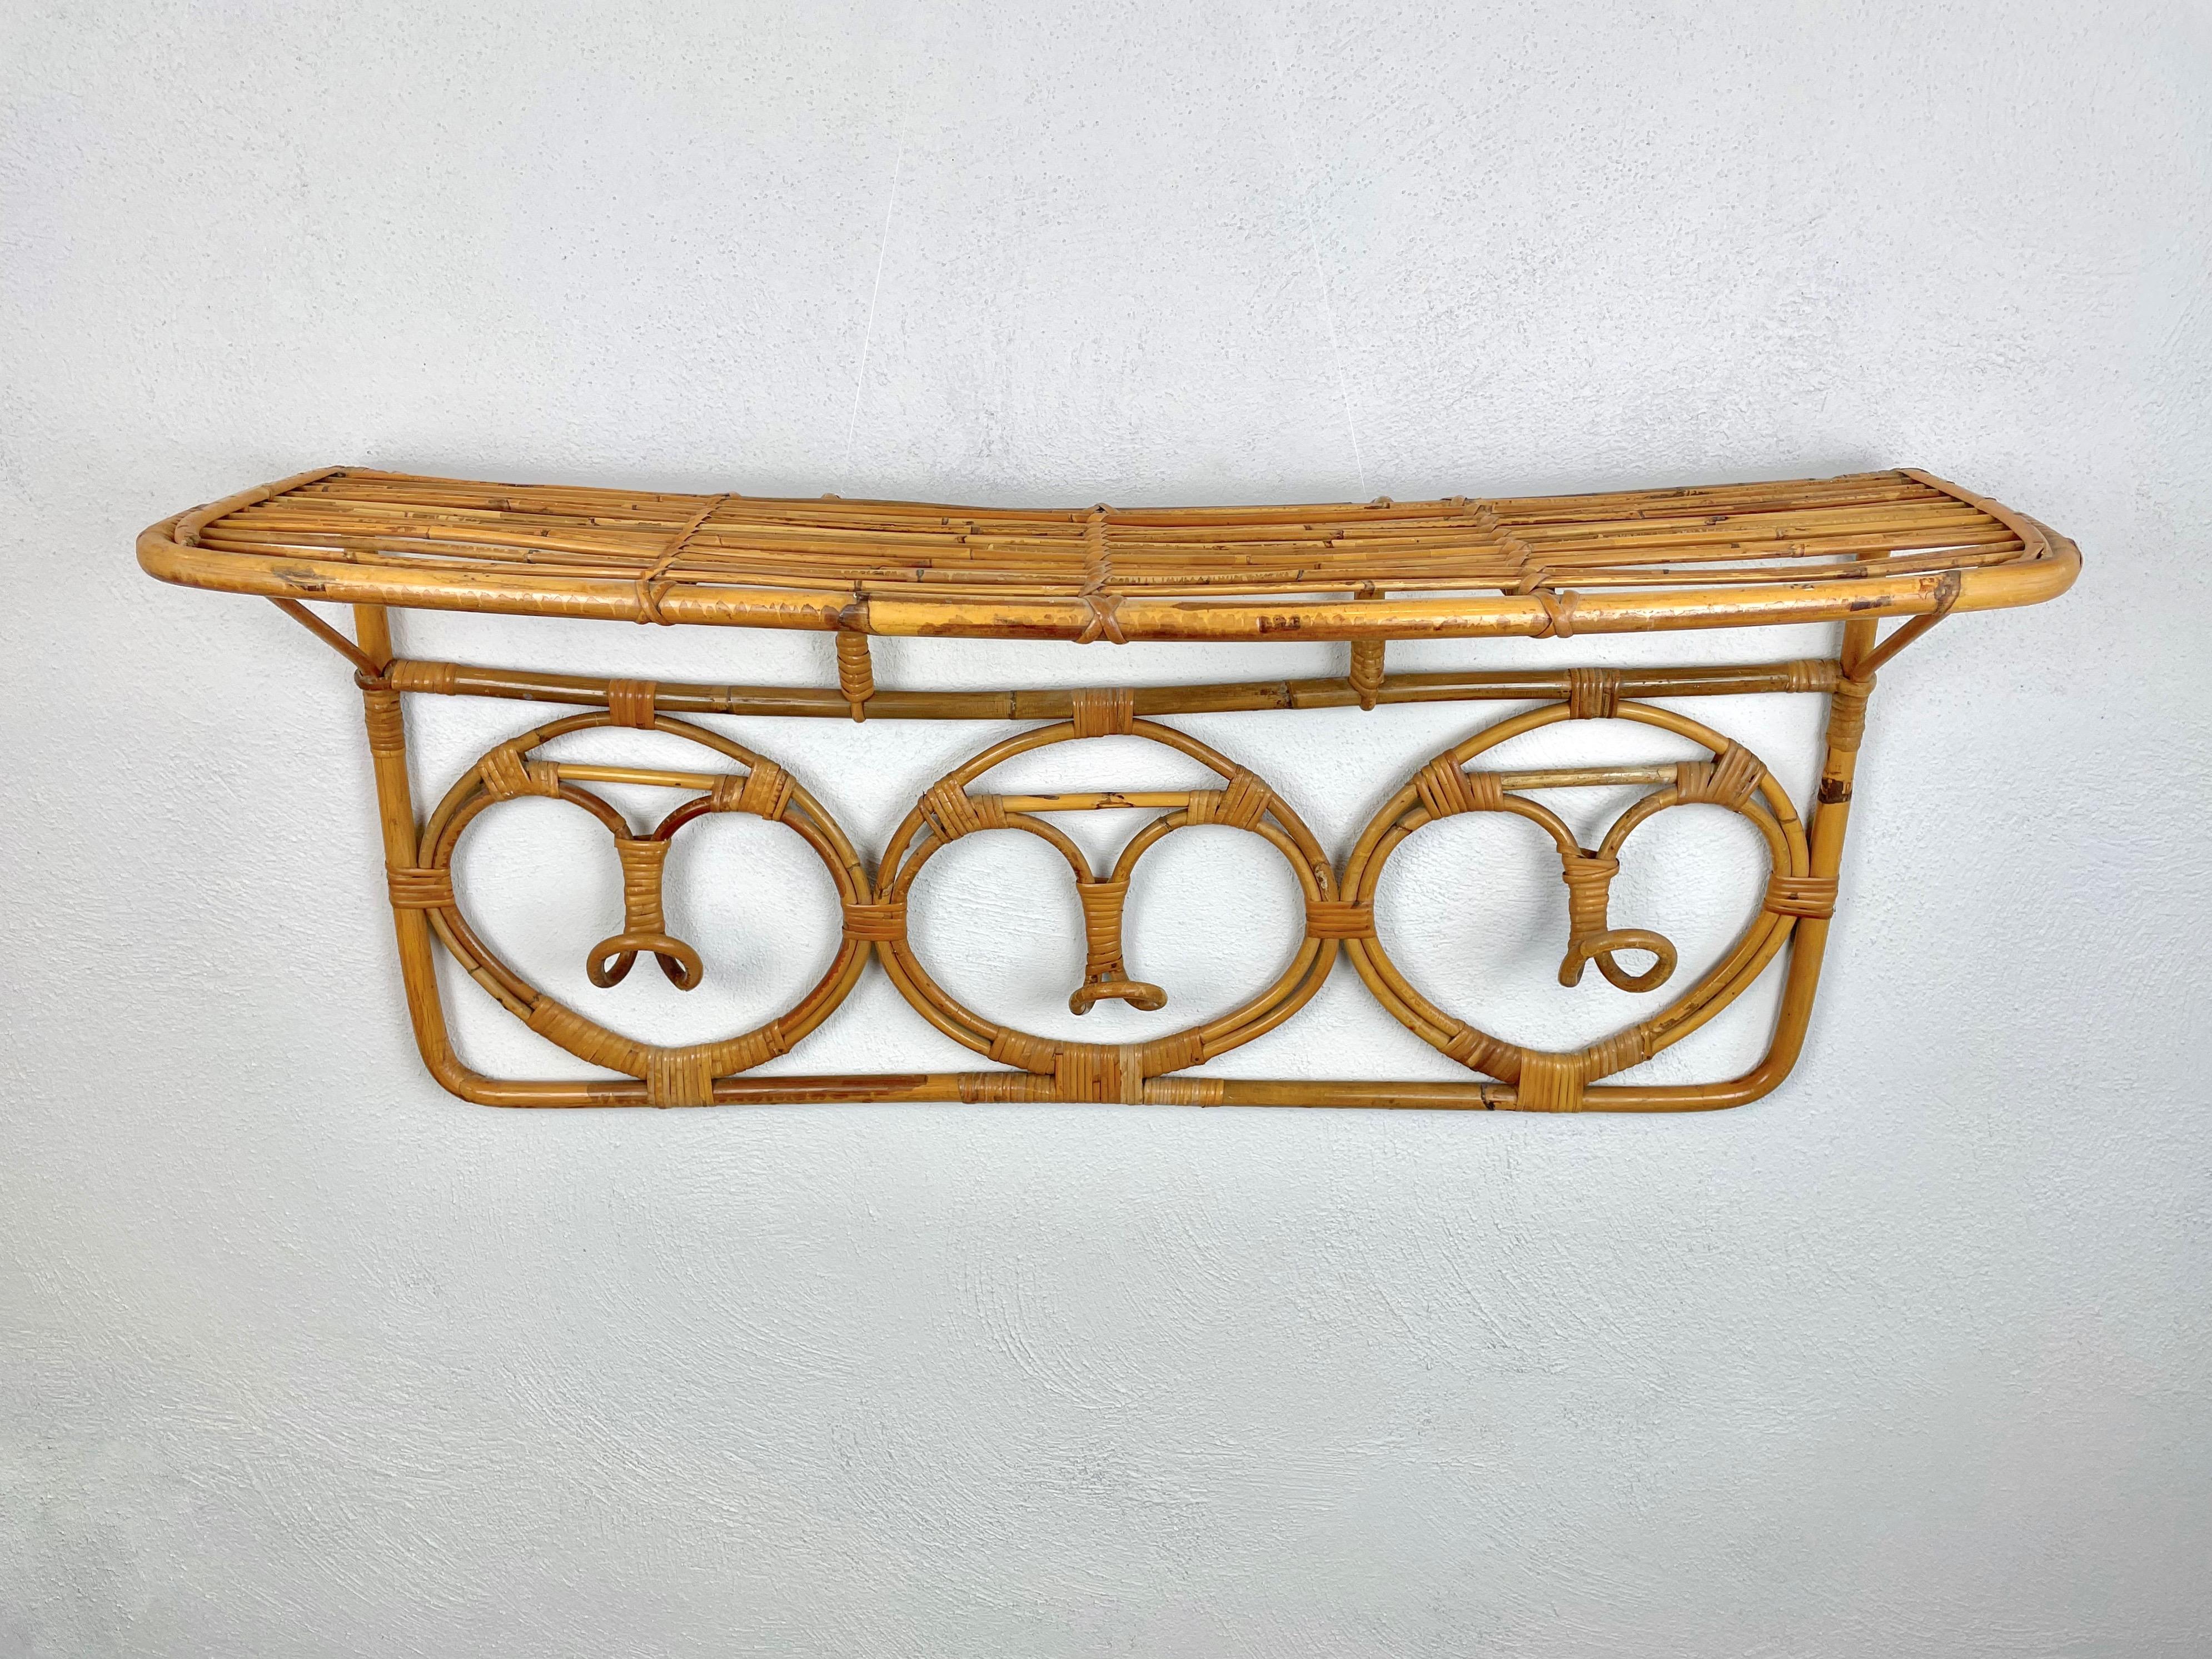 This coat hanger was produced in Italy in the 1960s and features three hooks for hanging clothes and a shelf for objects/bags, everything in rattan.